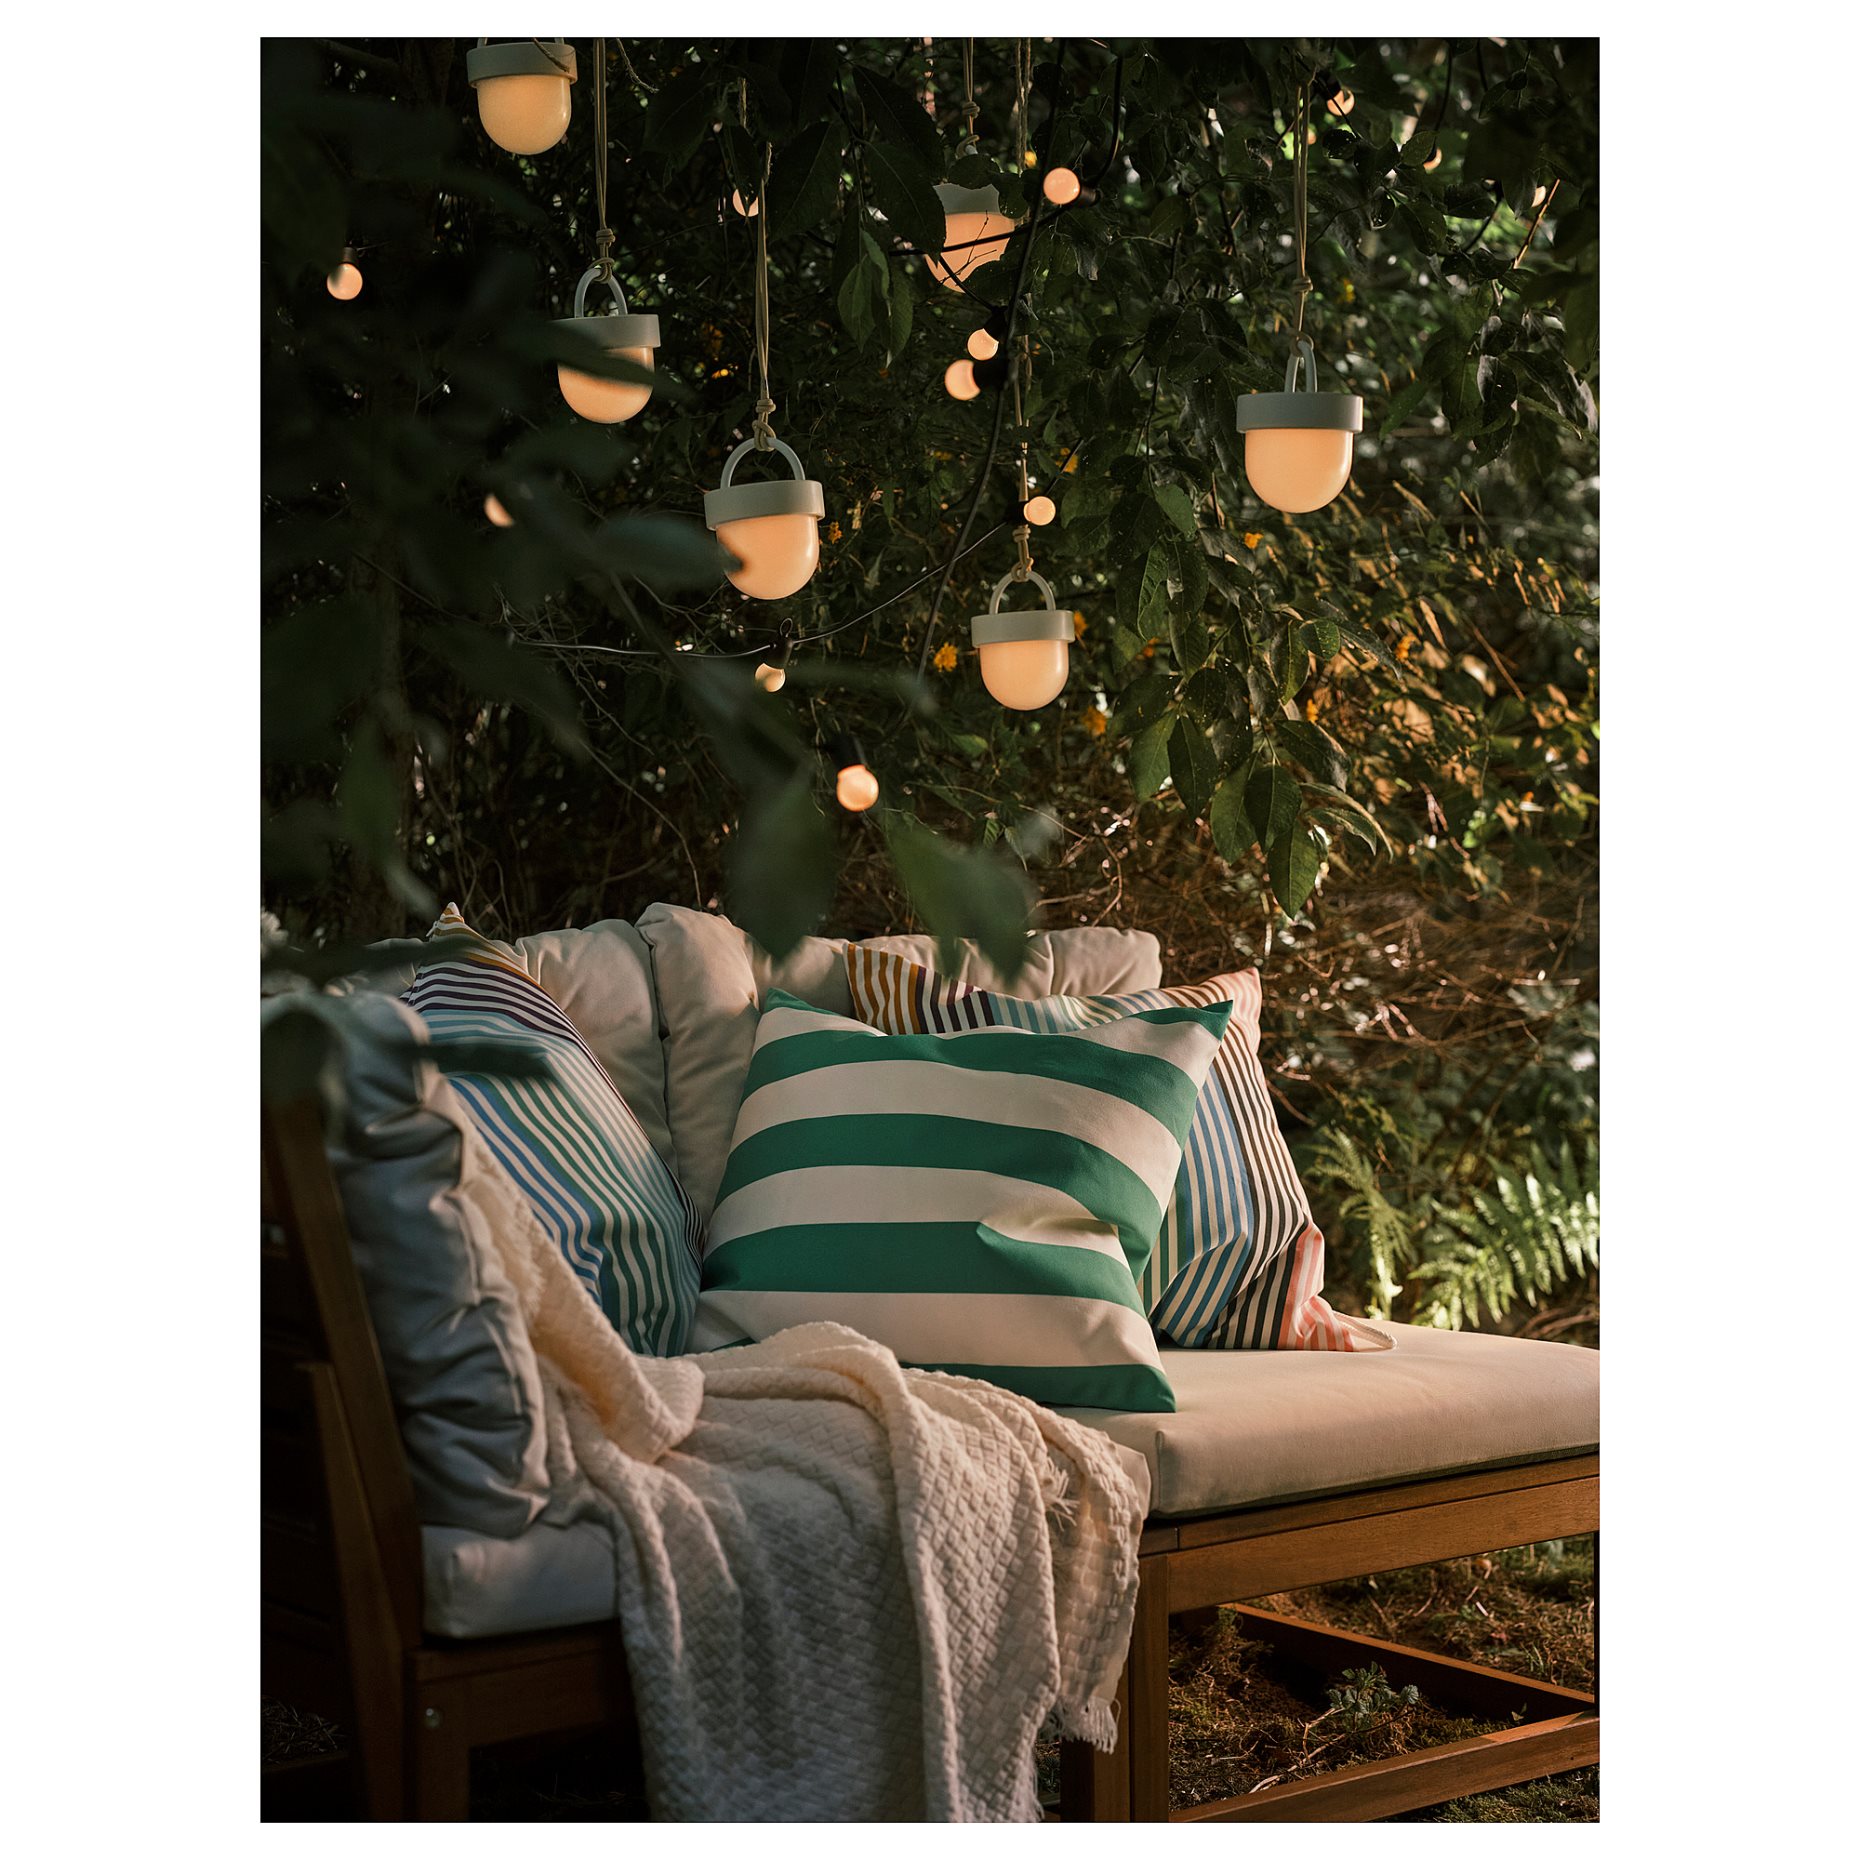 SOMMARLÅNKE, pendant lamp with built-in LED light source/outdoor/battery-operated, 10 cm, 405.443.30